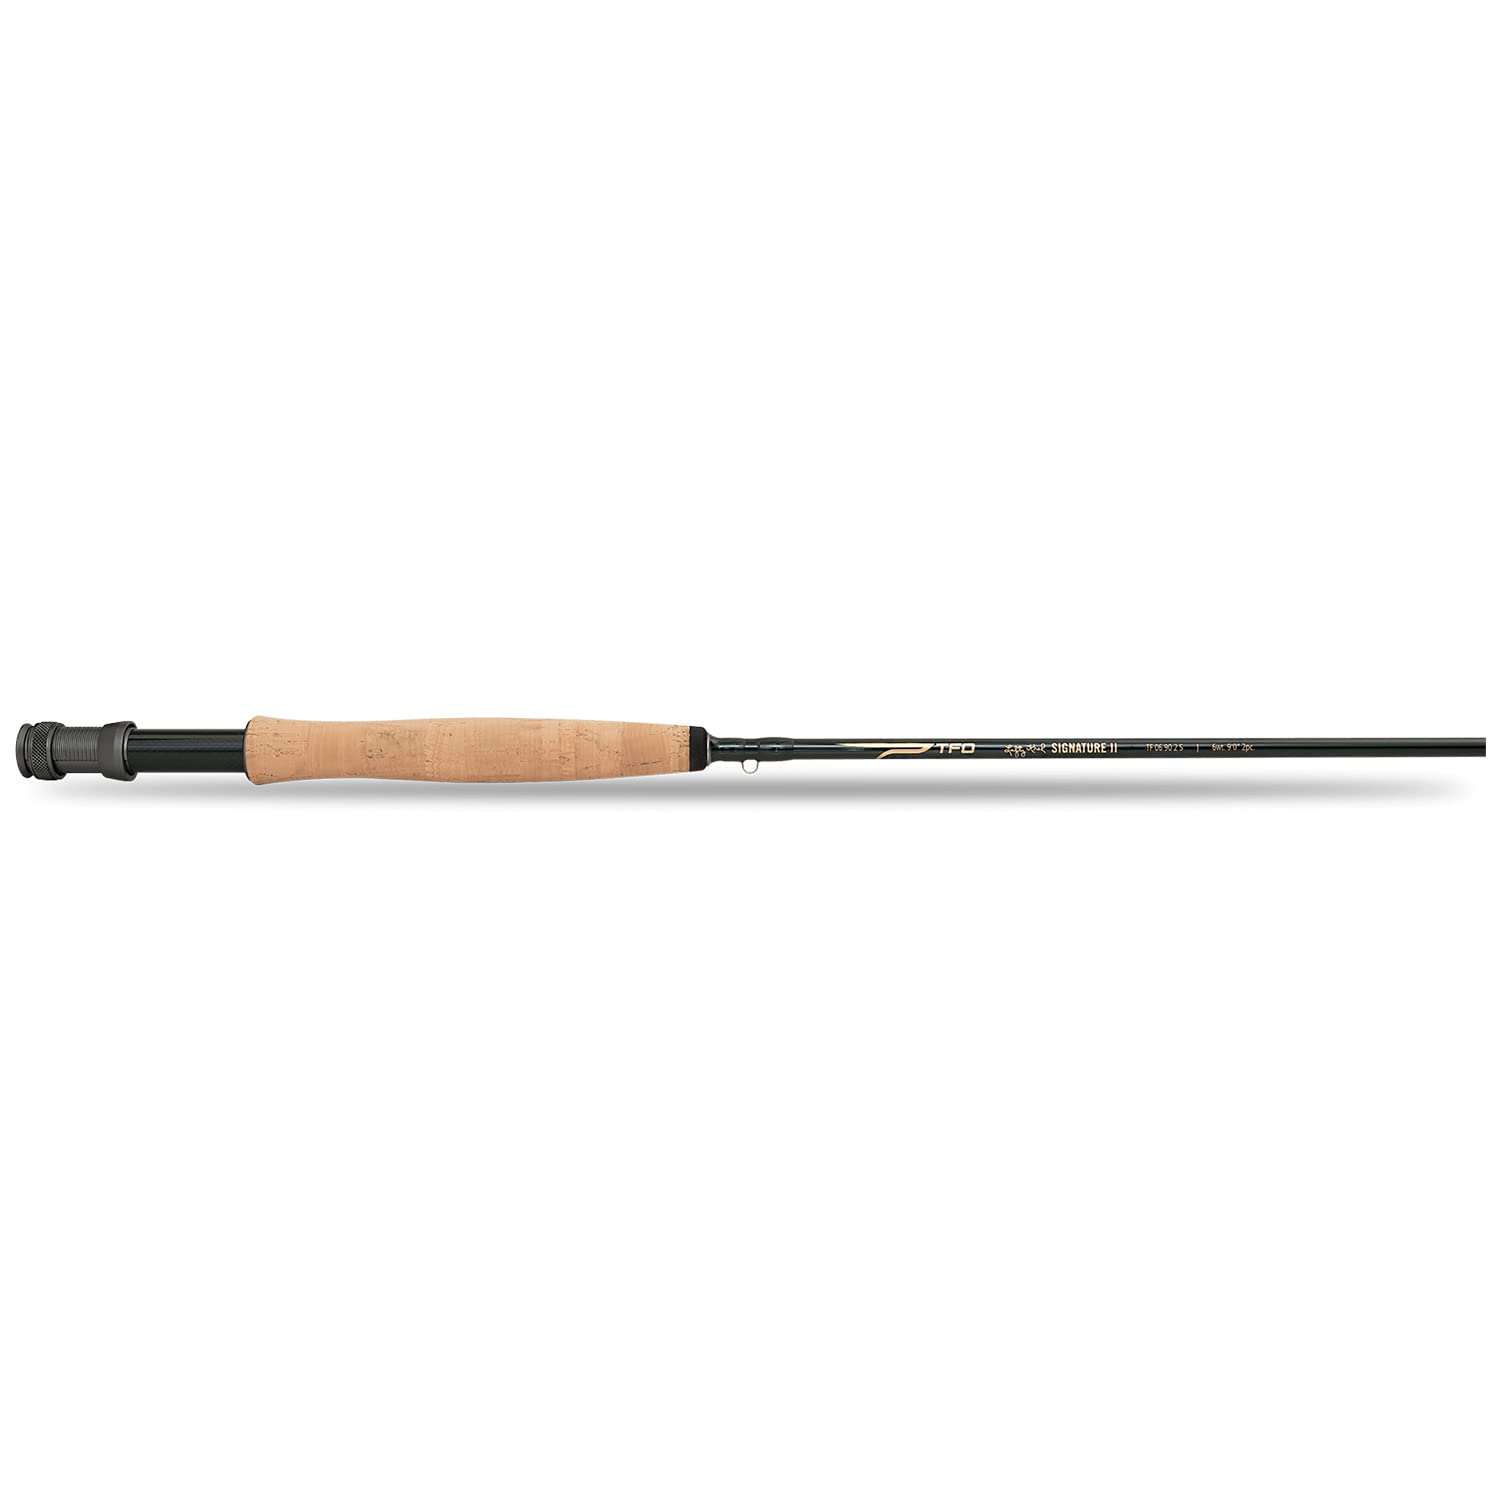 TEMPLE FORK OUTFITTERS Signature II Freshwater Saltwater Moderate Action  2-Piece Fly Fishing Rod Handle Type A 5WT 8'6 2PC